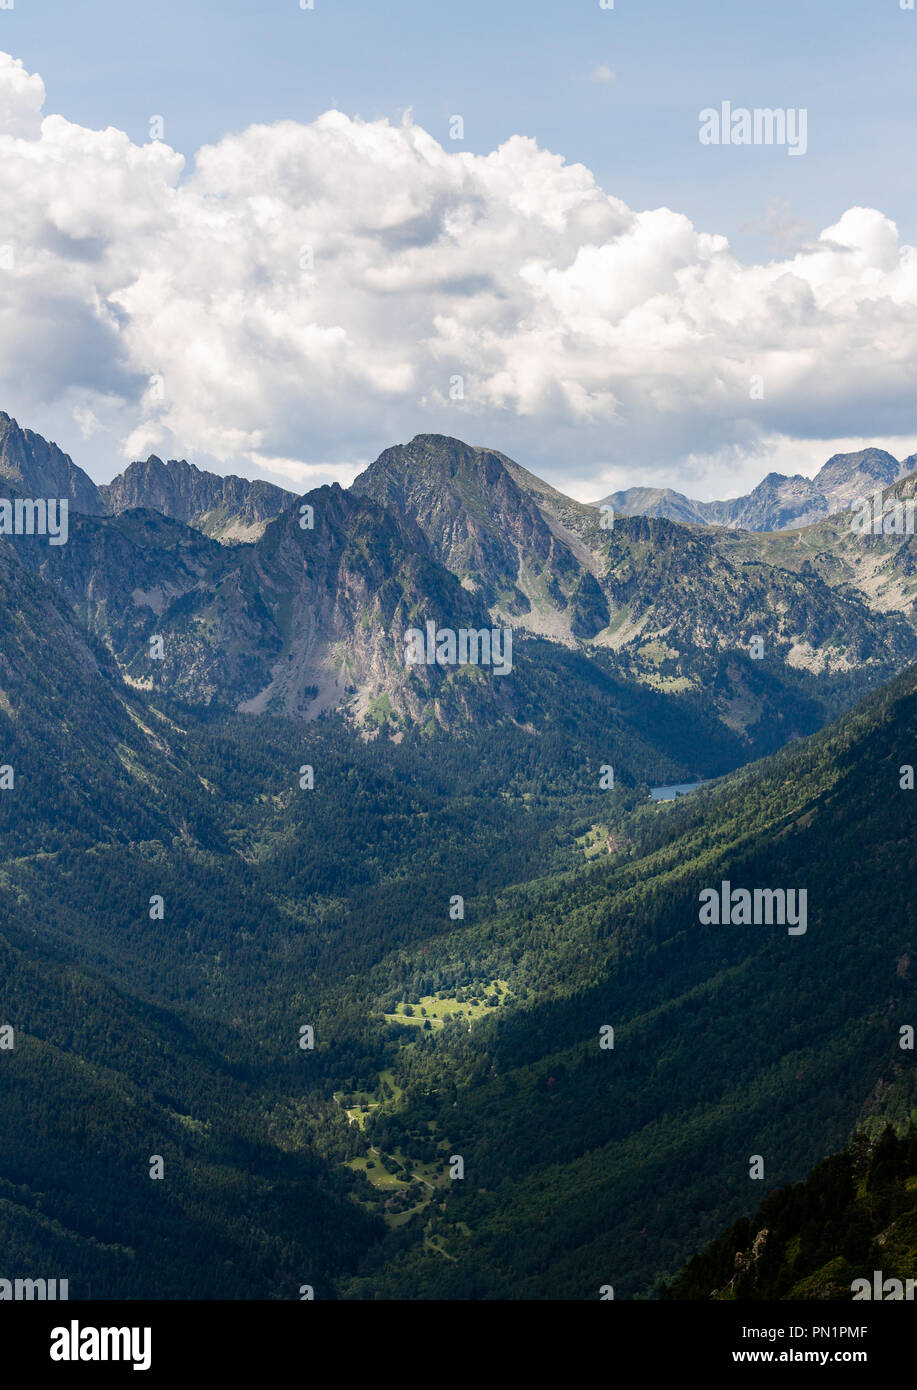 A mountain valley with various trees along the hillsides and distant peaks in the horizon. Stock Photo